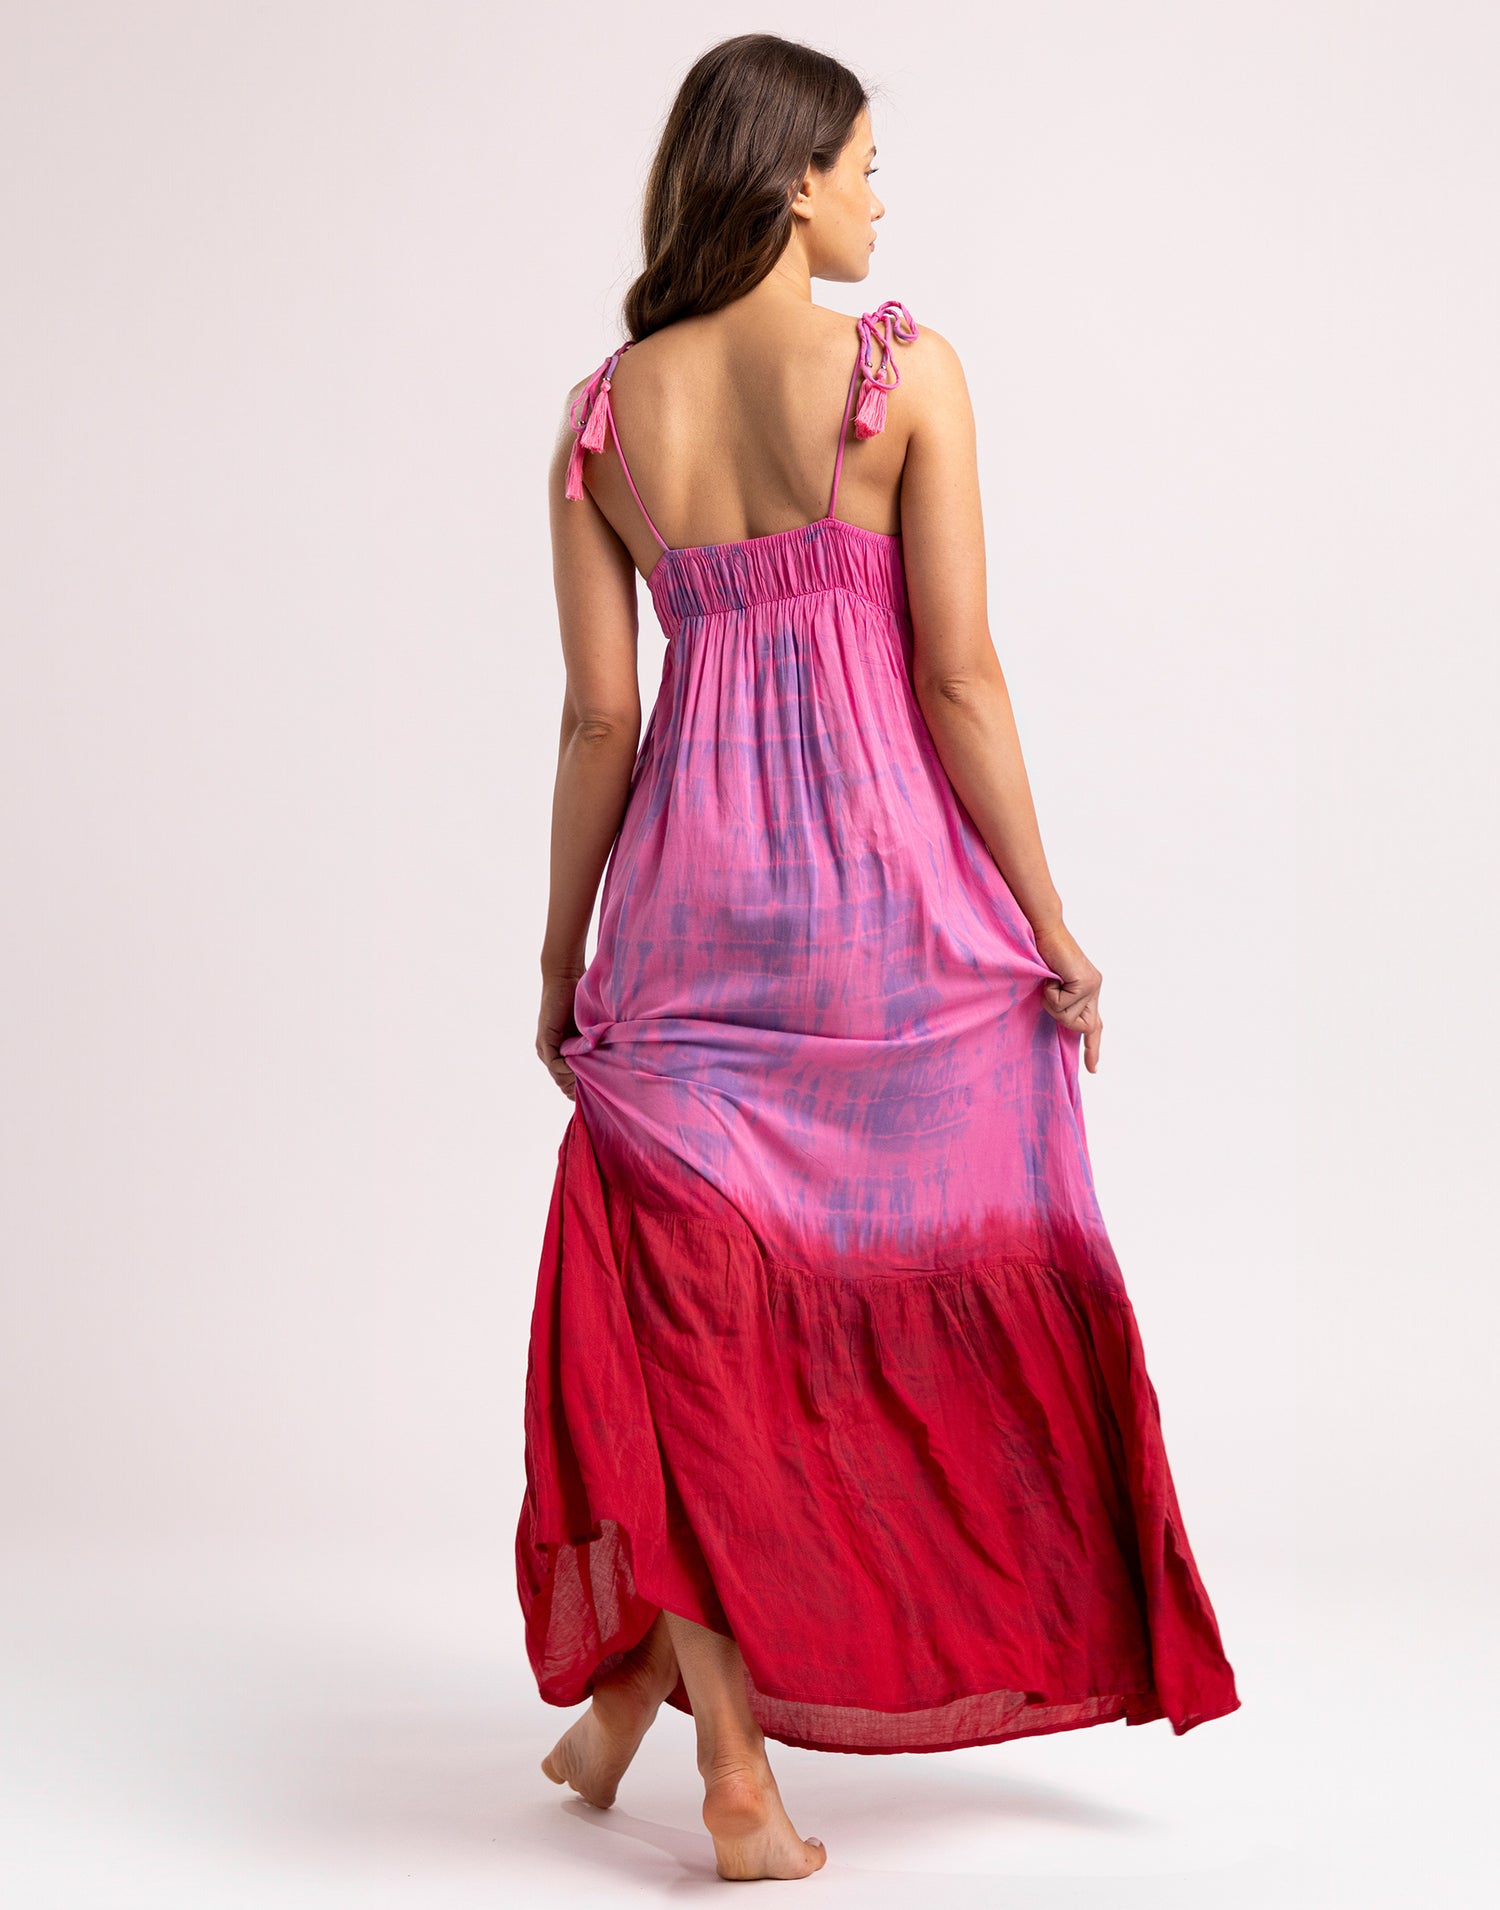 Dune Maxi Dress by Tiare Hawaii in Fuchsia Ombre - Back View